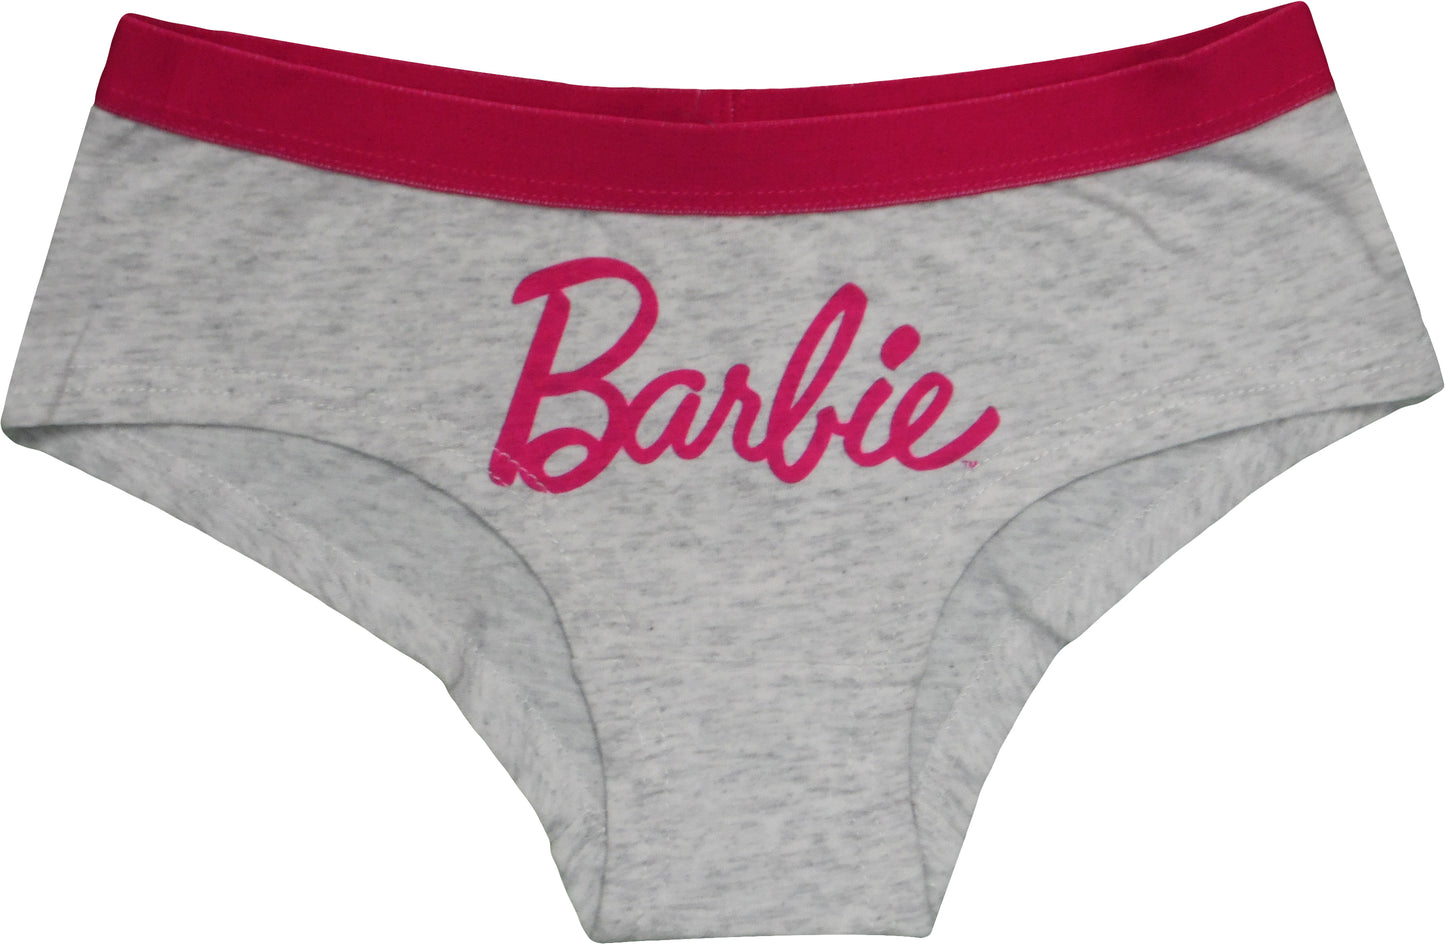 Barbie Cotton Underwear Knickers Pack of 2 for Girls